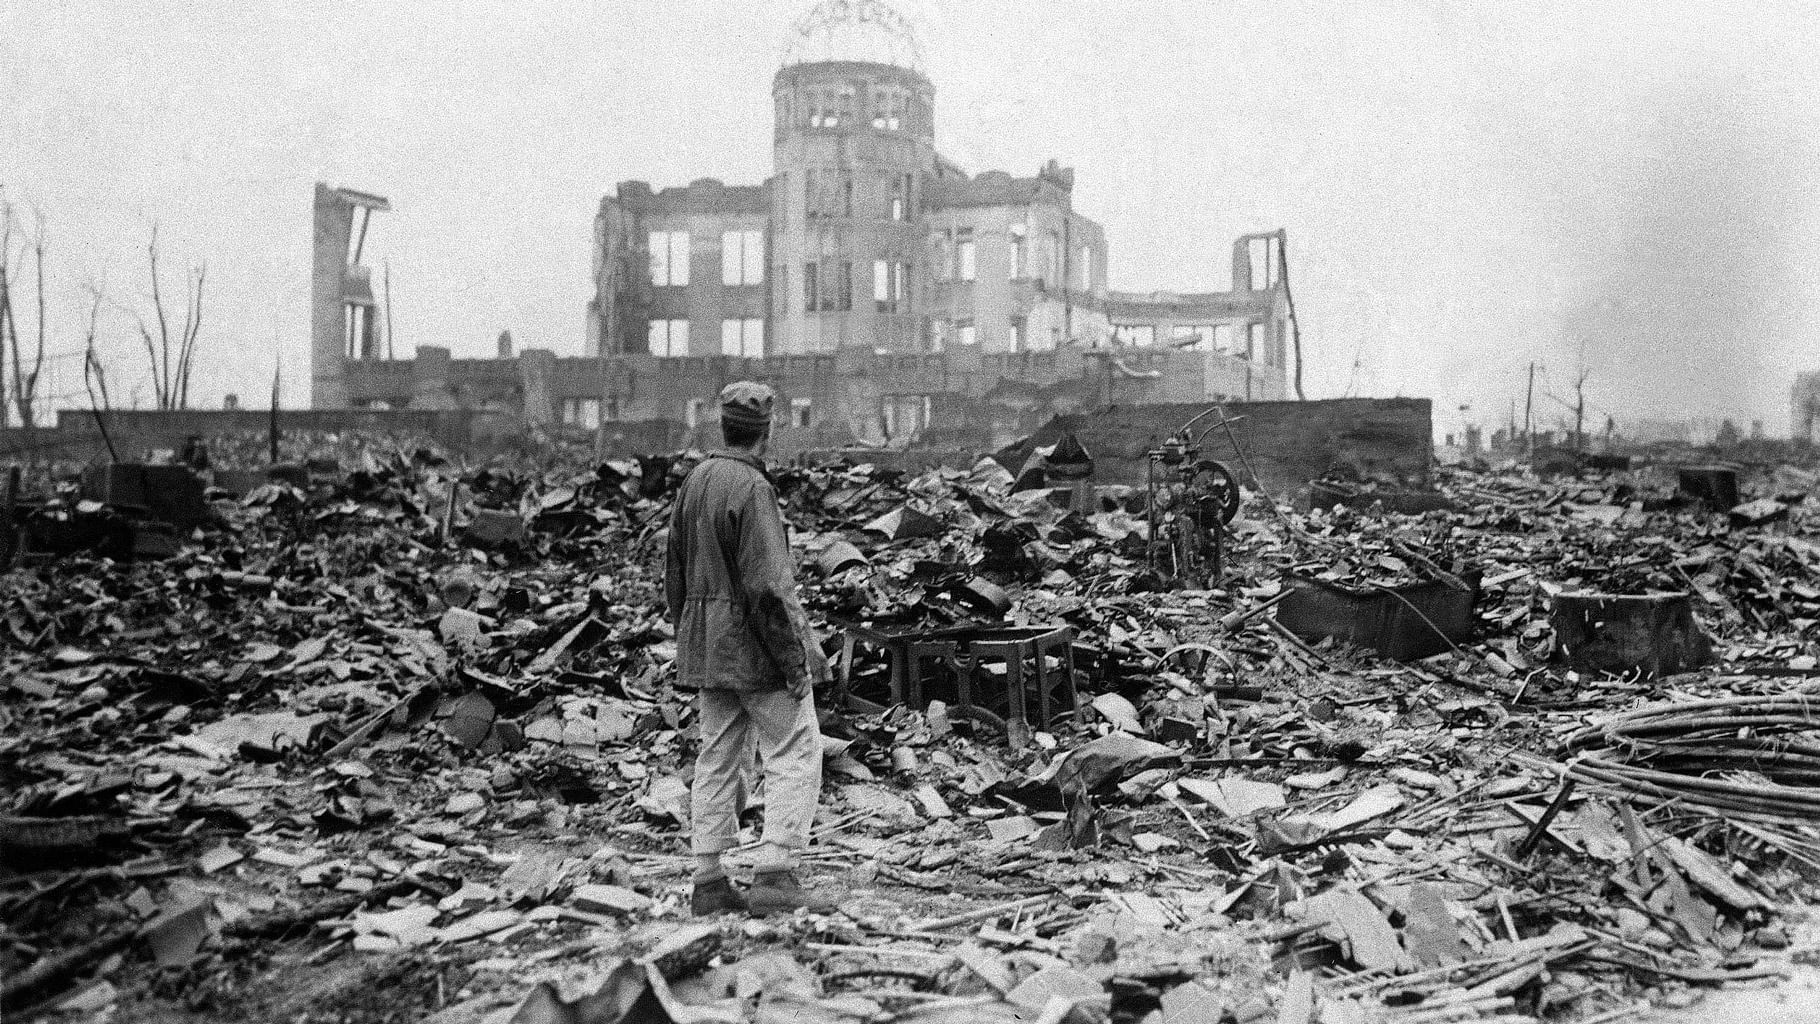 An allied correspondent stands in the rubble in front of the shell of a building that once was a movie theater in Hiroshima, Japan, a month after the first atomic bomb ever used in warfare was dropped by the US on 6 August 1945. In a moment seven decades in the making, President Barack Obama this month will become the first sitting American president to visit Hiroshima. (AP Photo/Stanley Troutman)